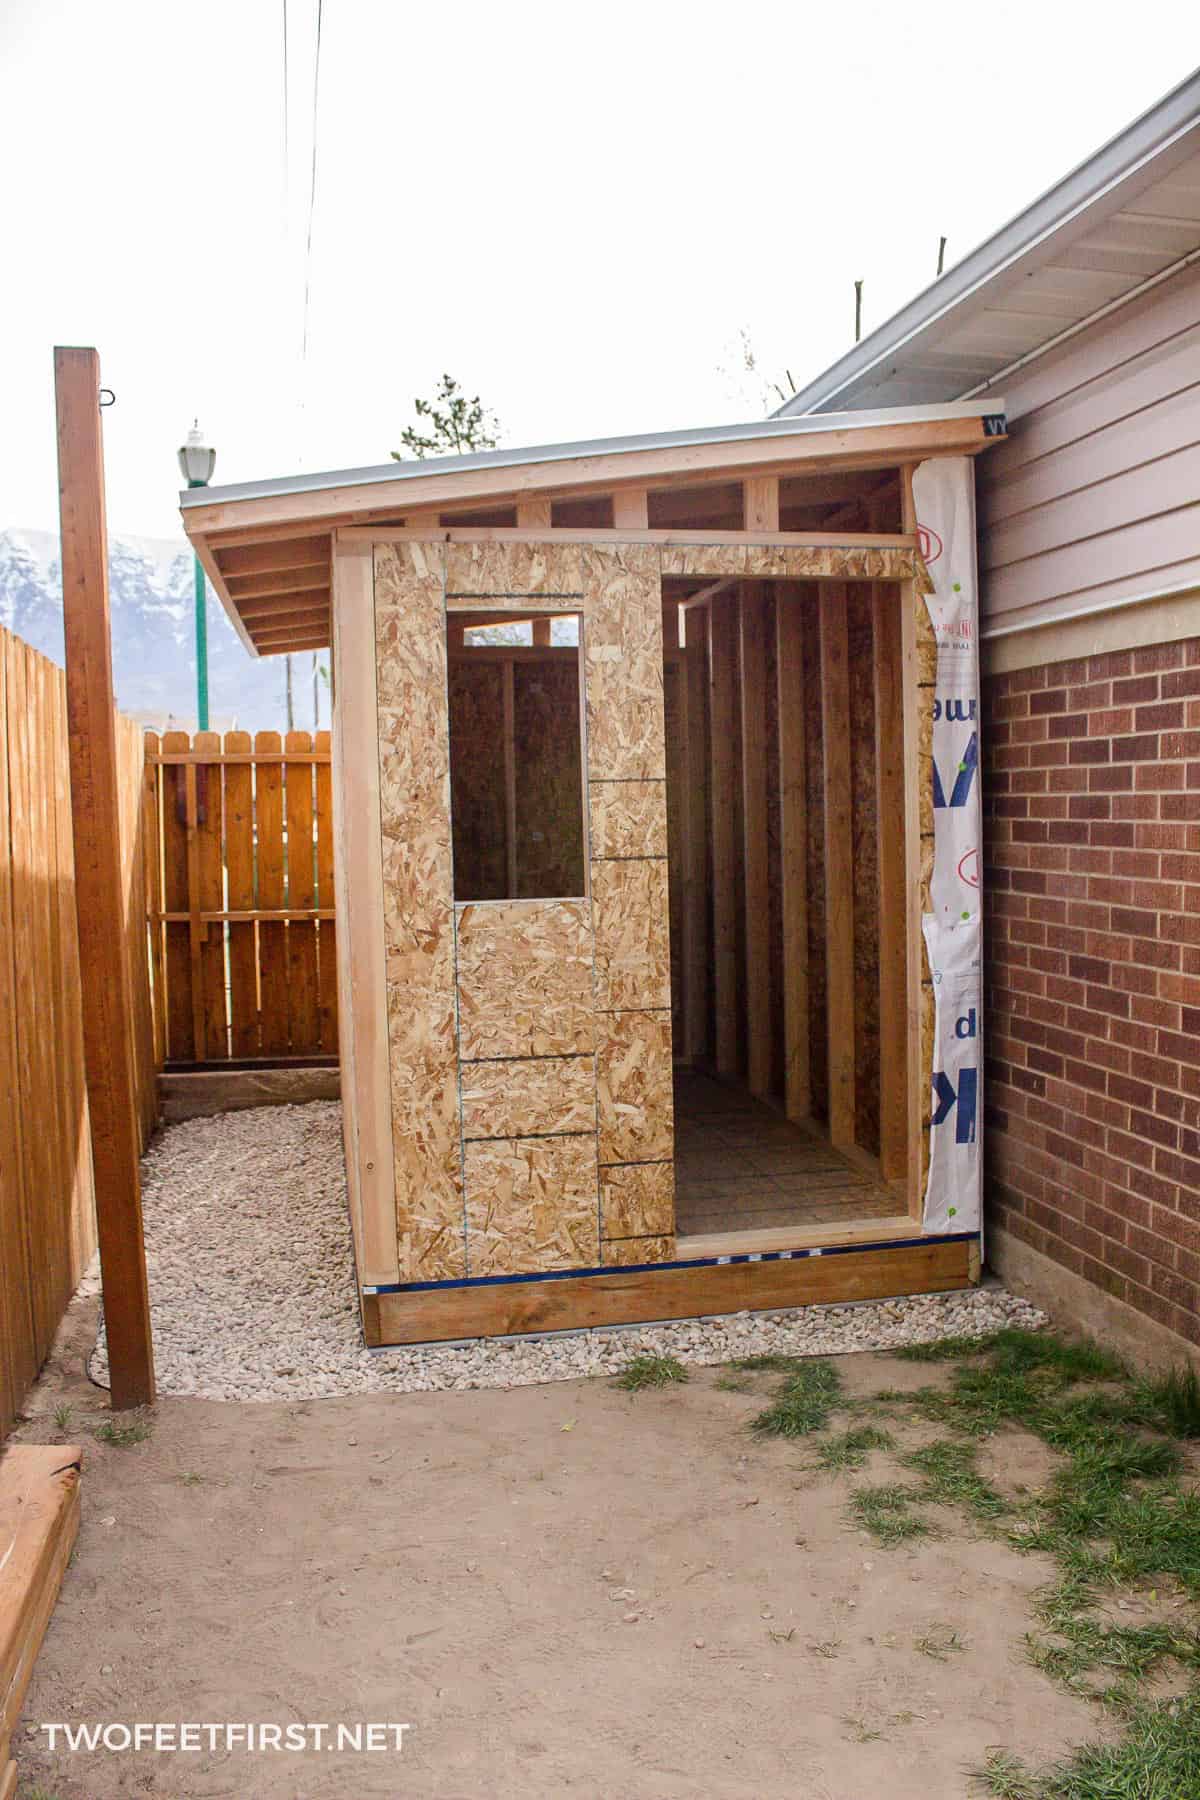 How to build a lean to off a metal shed